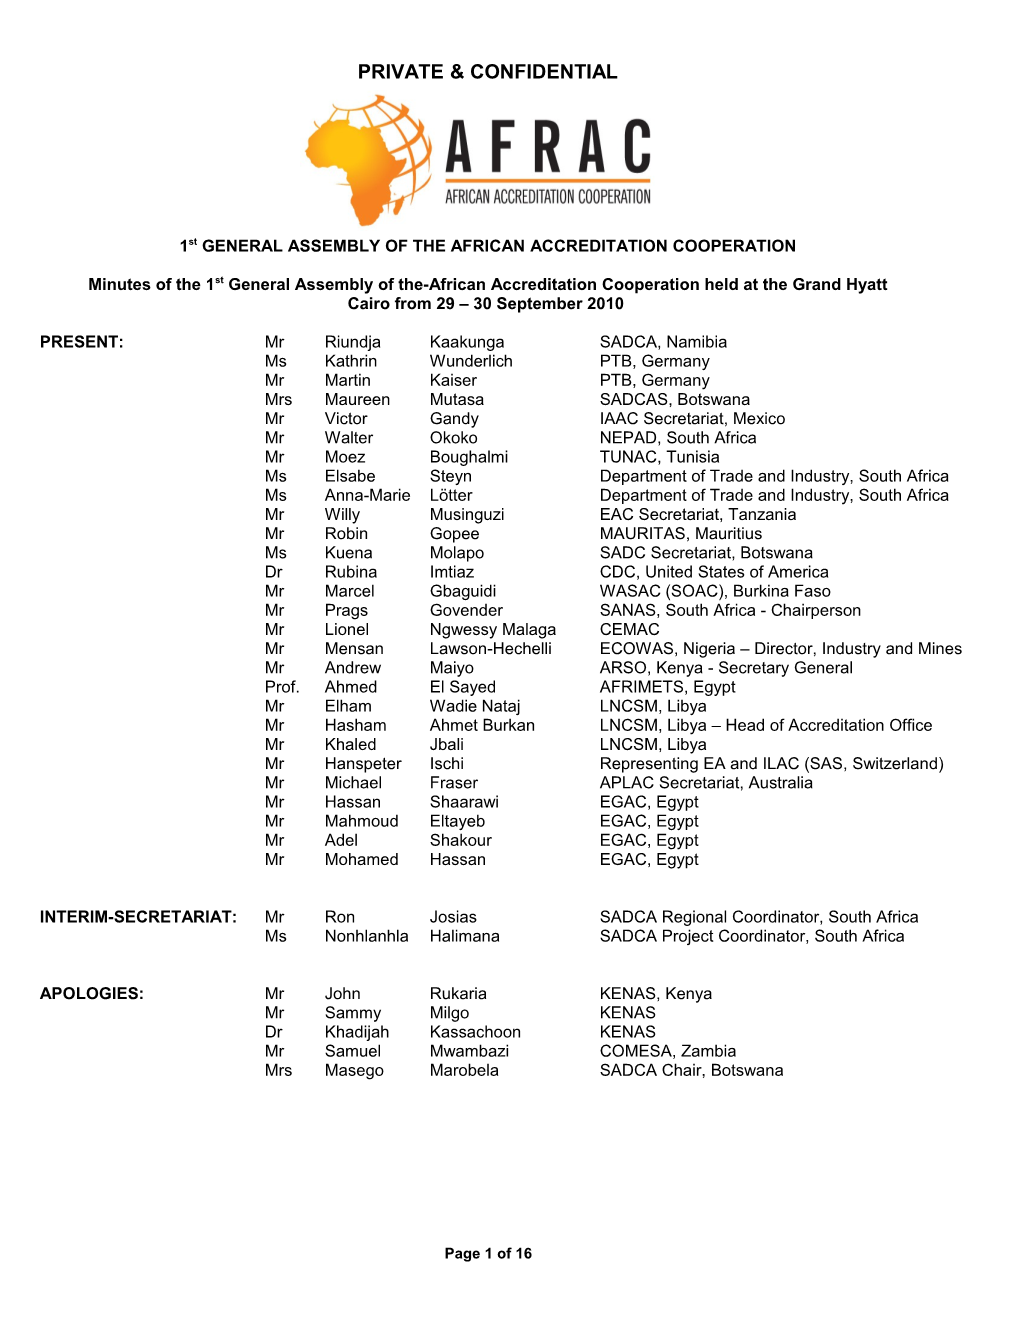 1St GENERAL ASSEMBLY of the AFRICAN ACCREDITATION COOPERATION